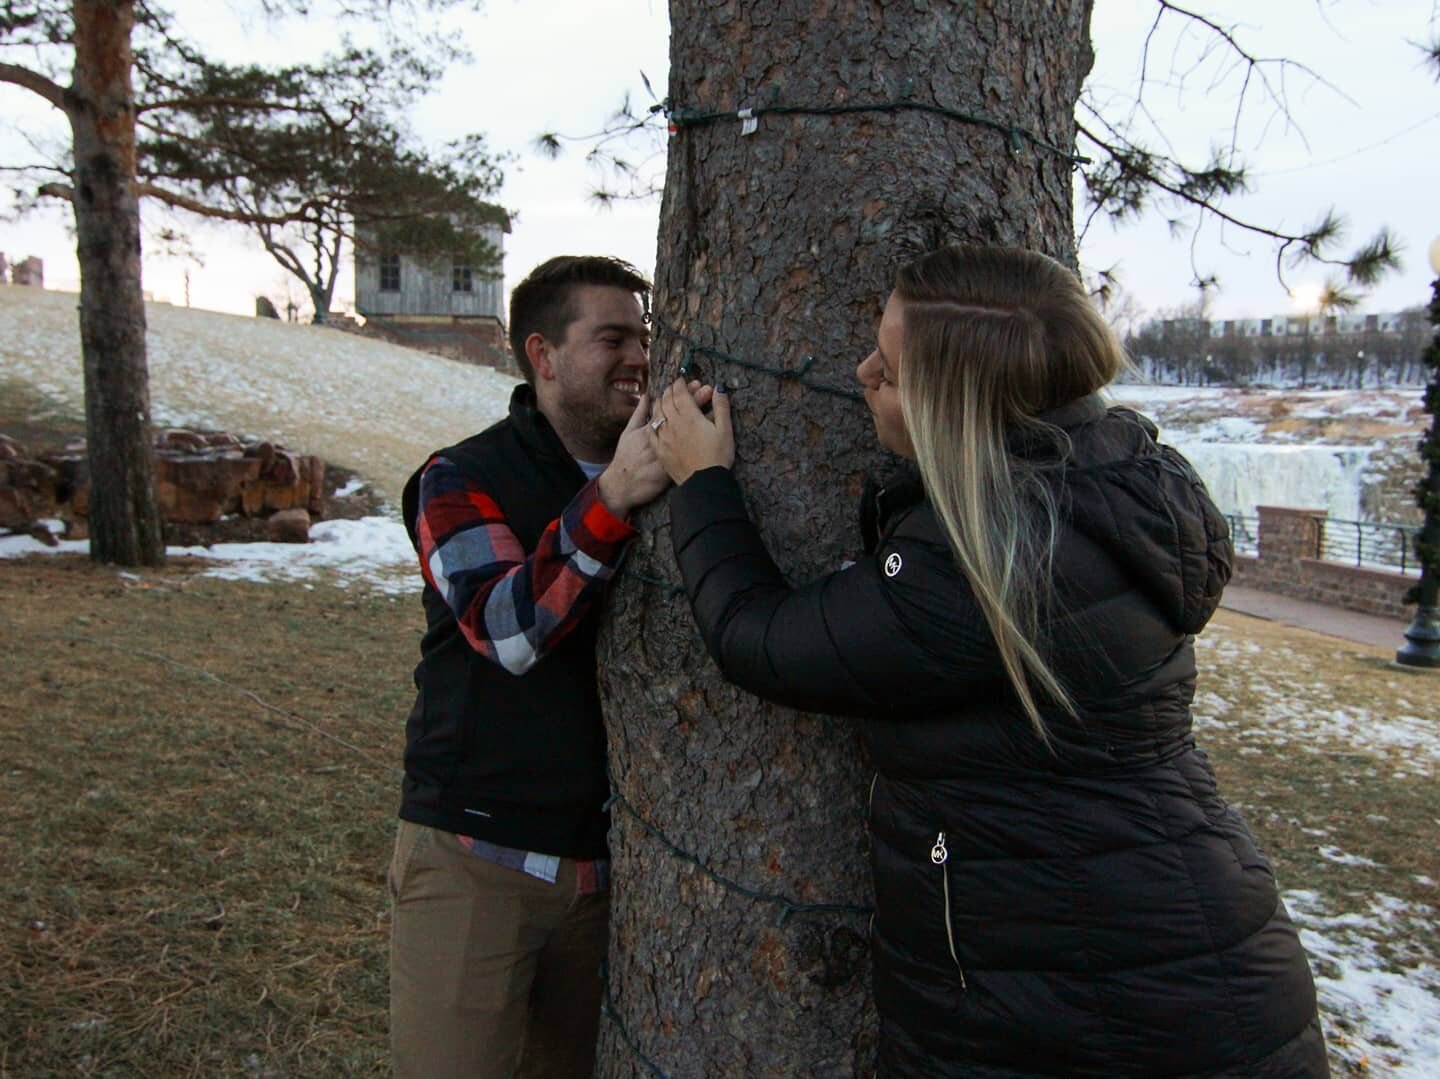 Us: &quot;Let's have you both look at each other around the tree&quot; 

What Kenny heard: &quot;Look at each other through the tree&quot; 

Definitely one of our favorite moments from this session - teasing your significant other in good fun is a fa